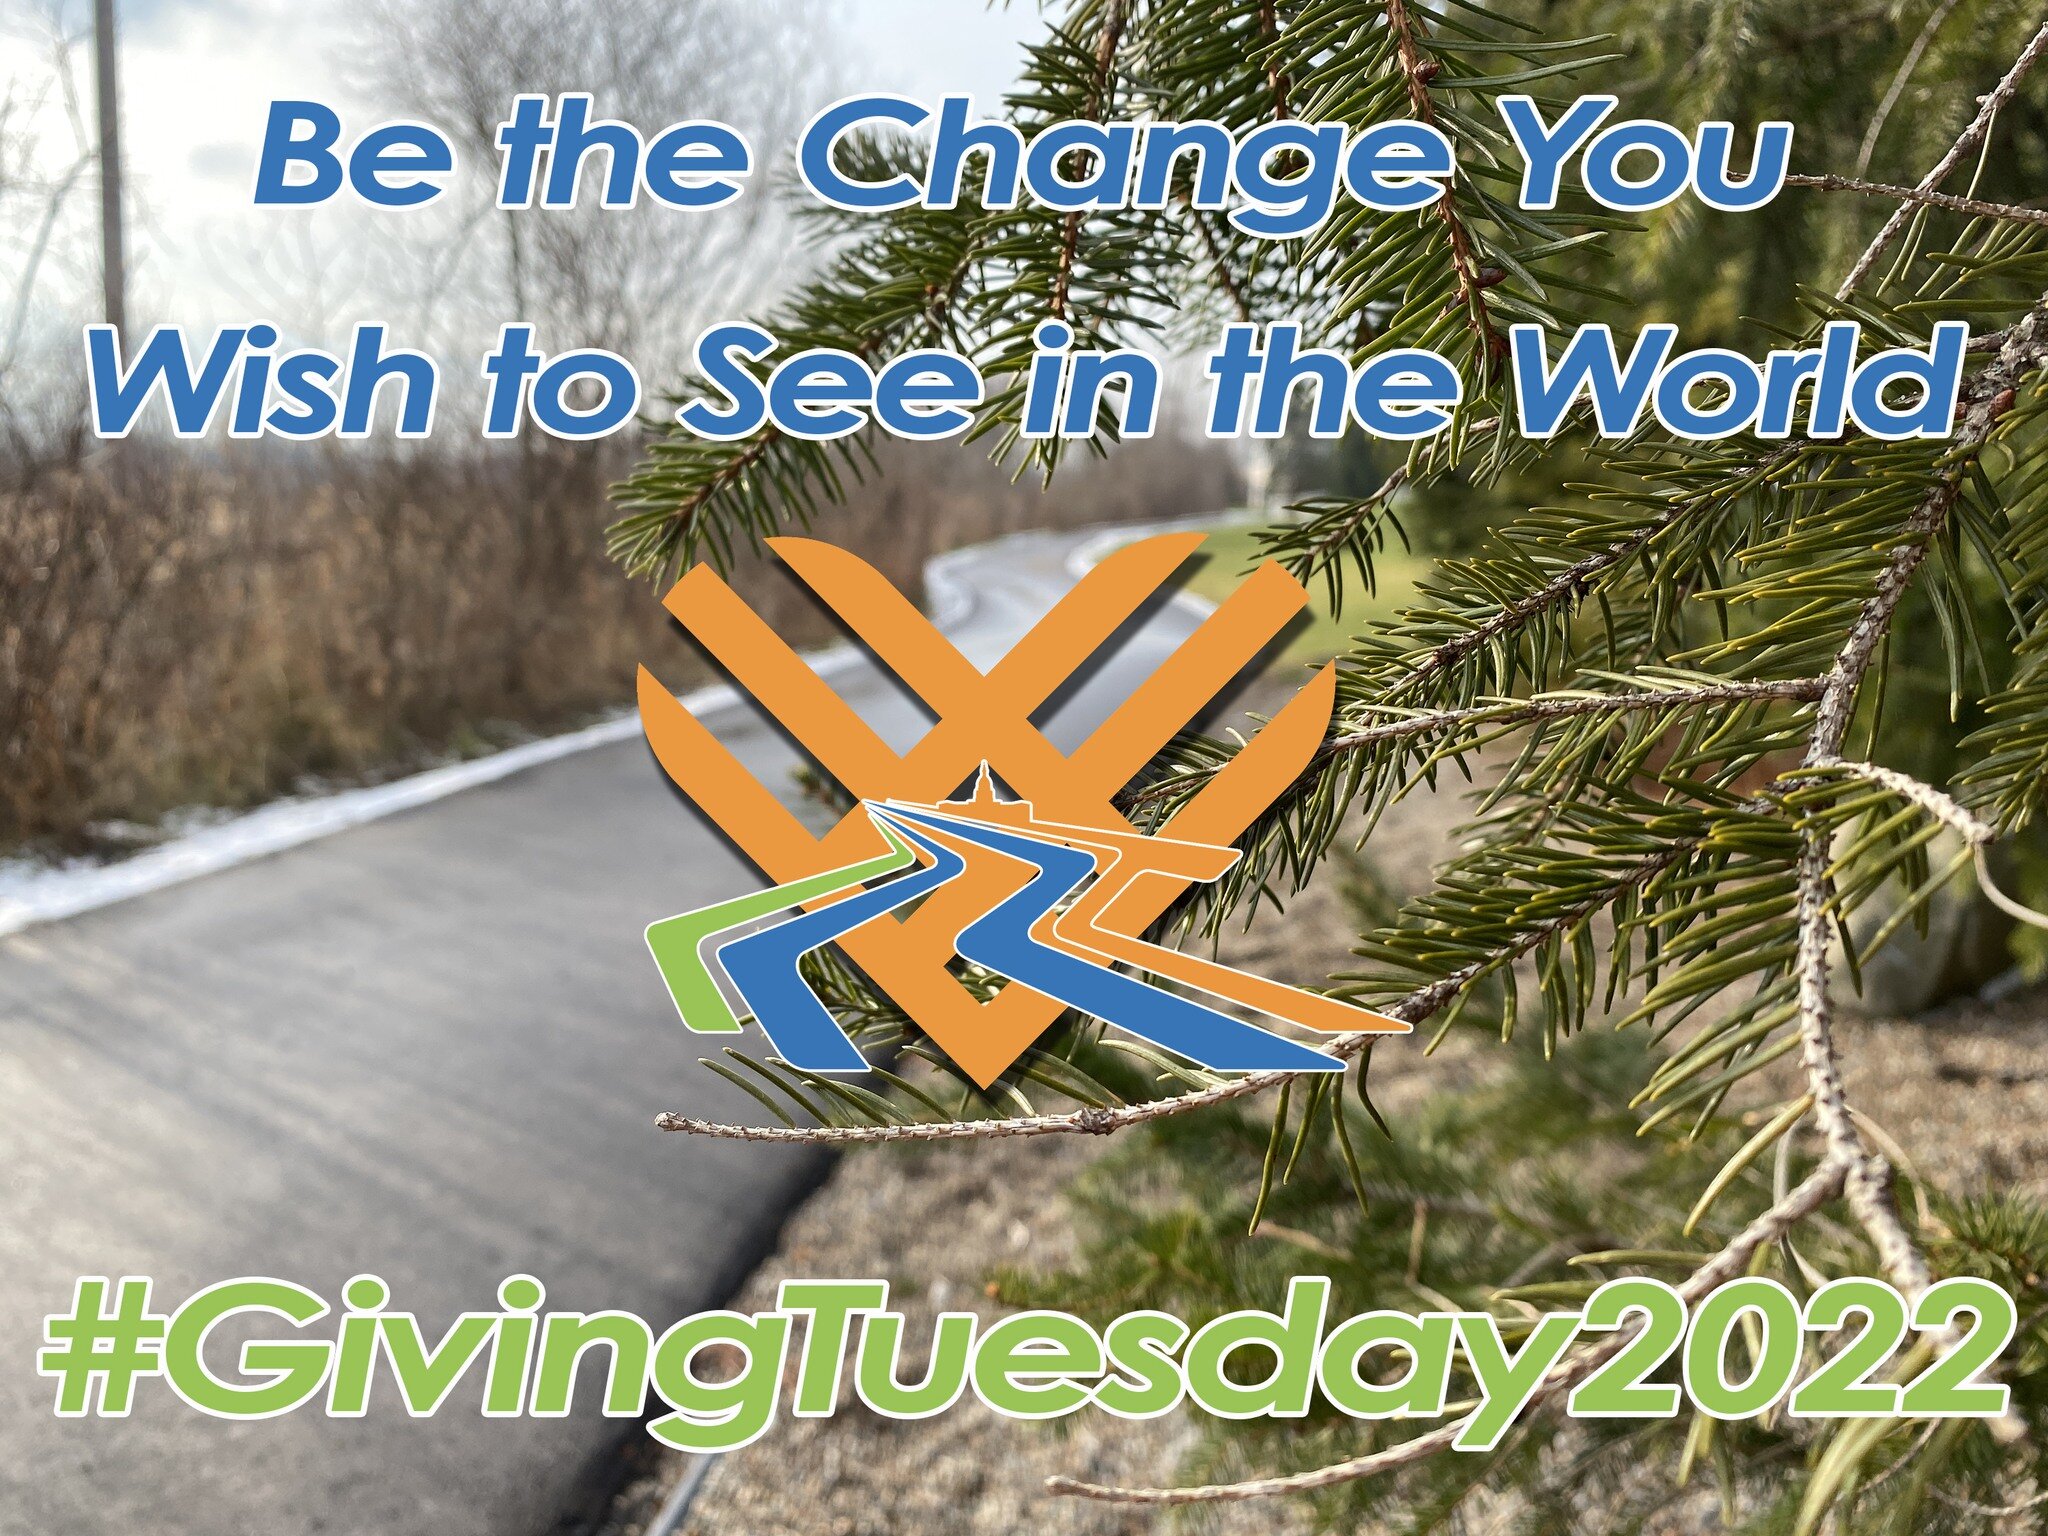 #GivingTuesday is coming up soon! If you love the Lansing region's trails, help us continue our mission of promoting a safe, clean, and thoughtfully-expanded regional trail system by donating at lansingtrails.org today... help us raise $2,022 in 2022